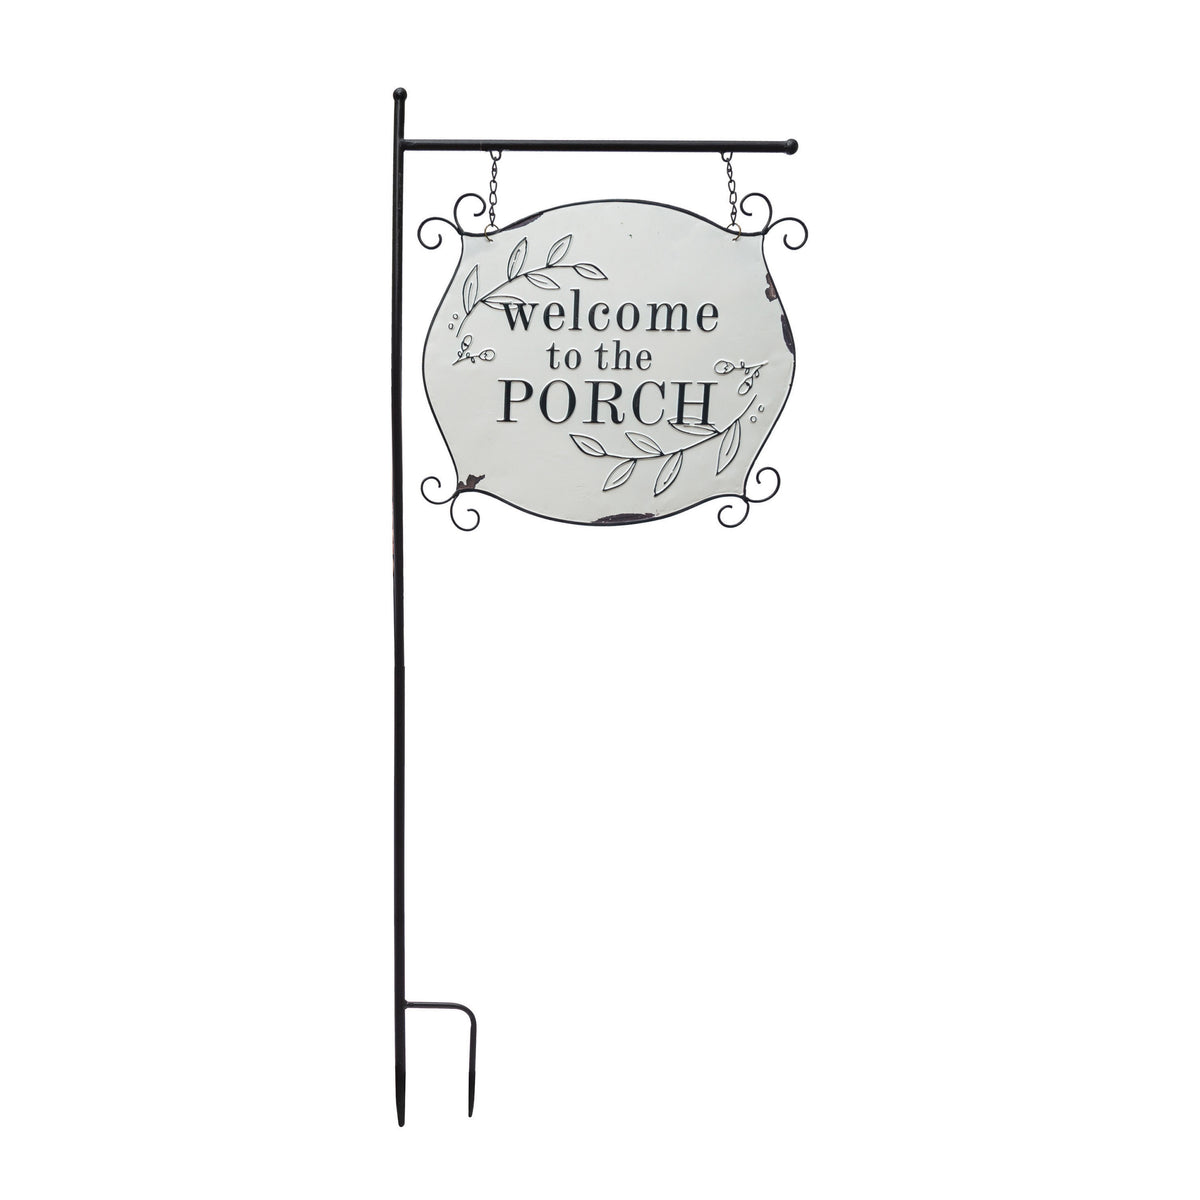 Embossed Metal Two-Sided Porch Stake "Welcome To The Porch"